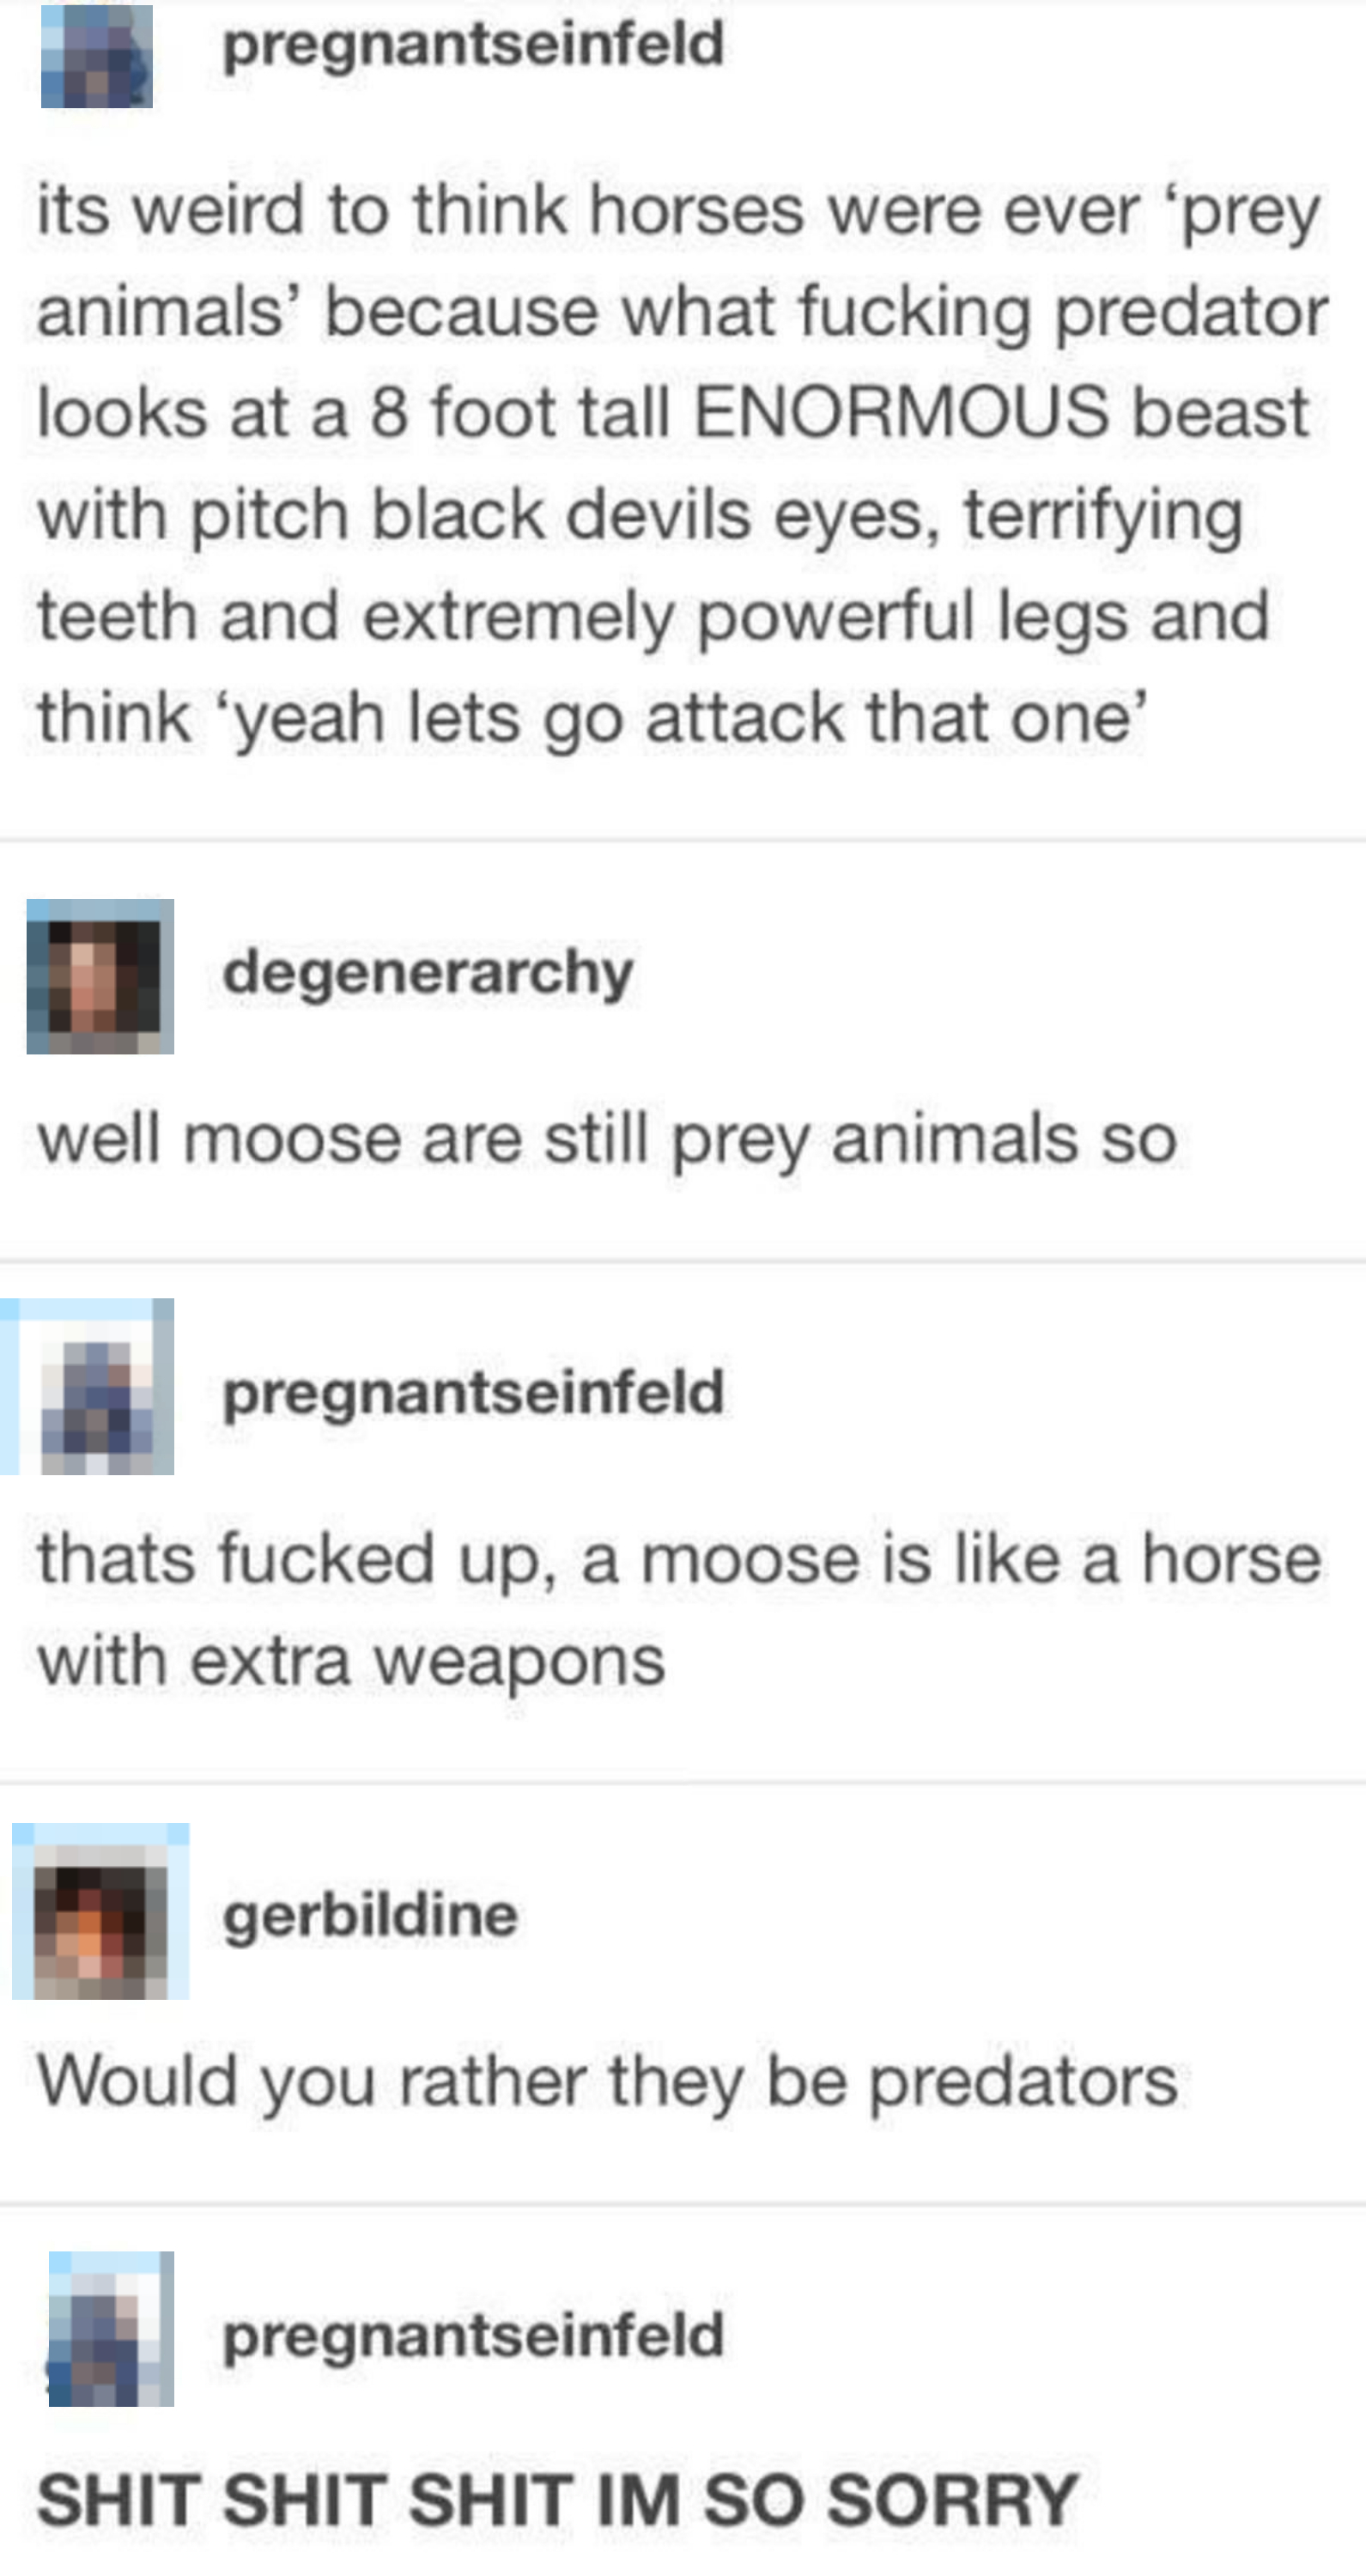 Text exchange humorously reflecting shock at learning that prey animals like horses and moose are still considered prey despite size and attributes